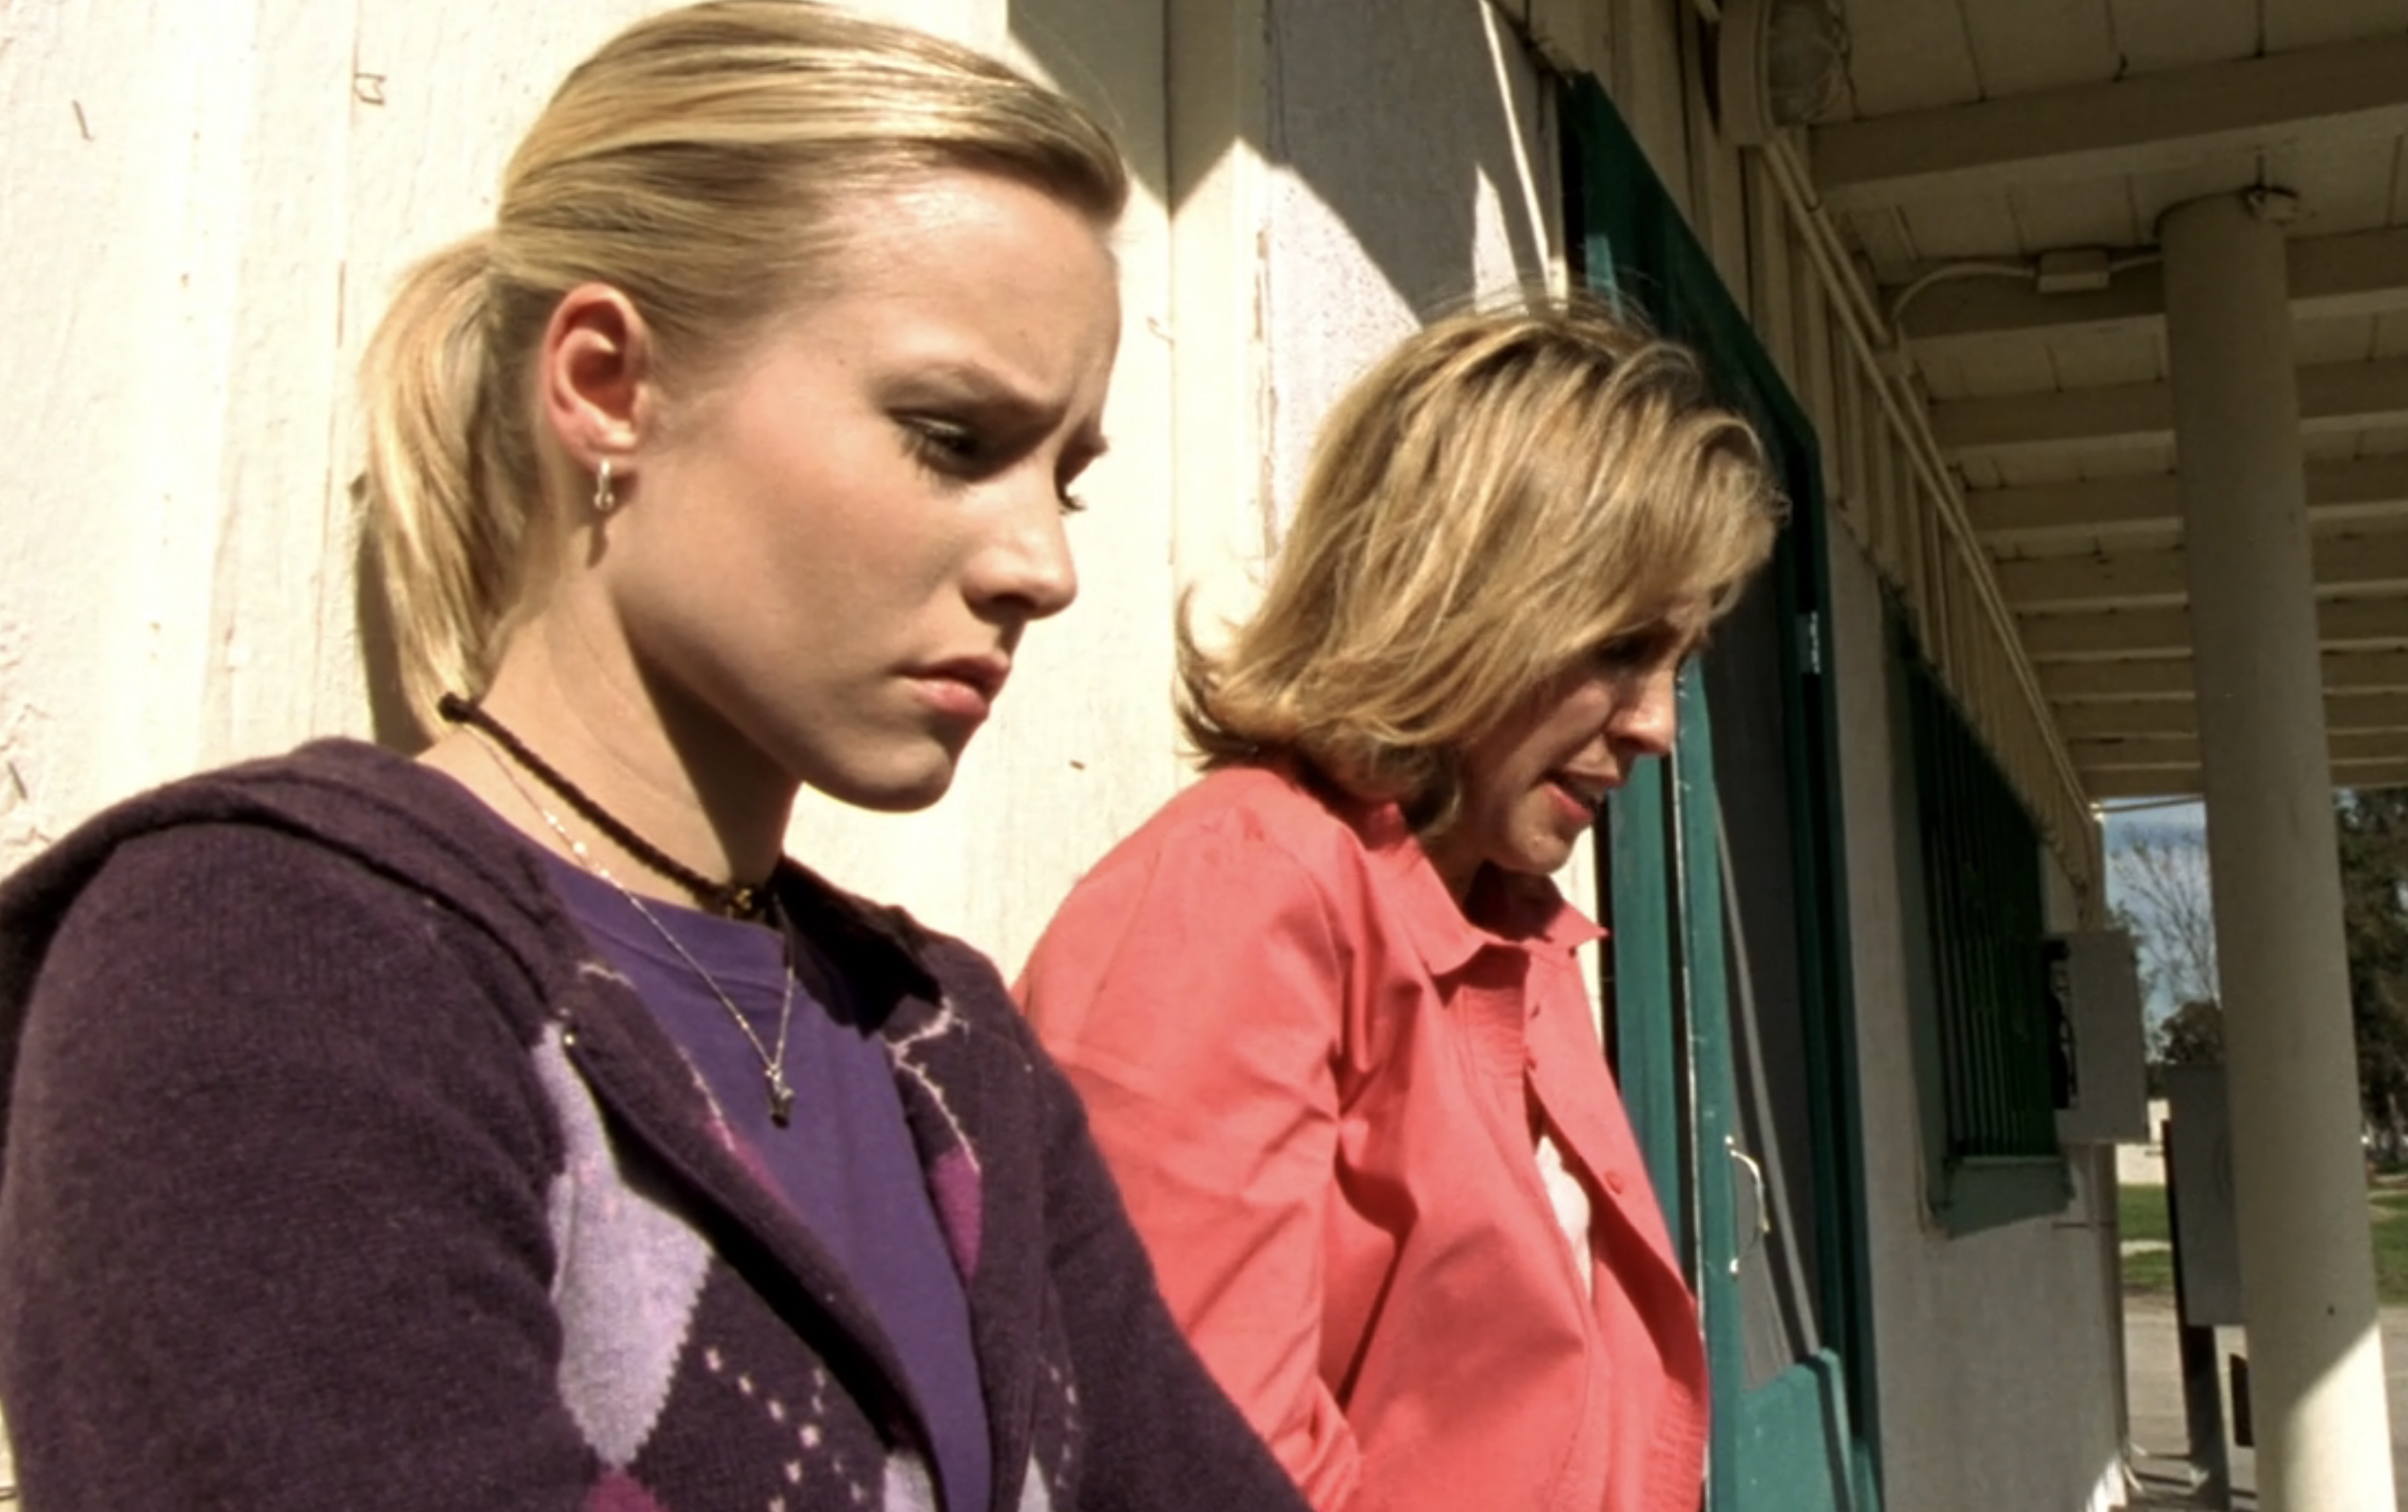 Screenshot from S1E16 of Veronica Mars. Veronica and Lianne are outside in daytime, both leaning on a building. Both are looking down. Veronica has an expression of concern.